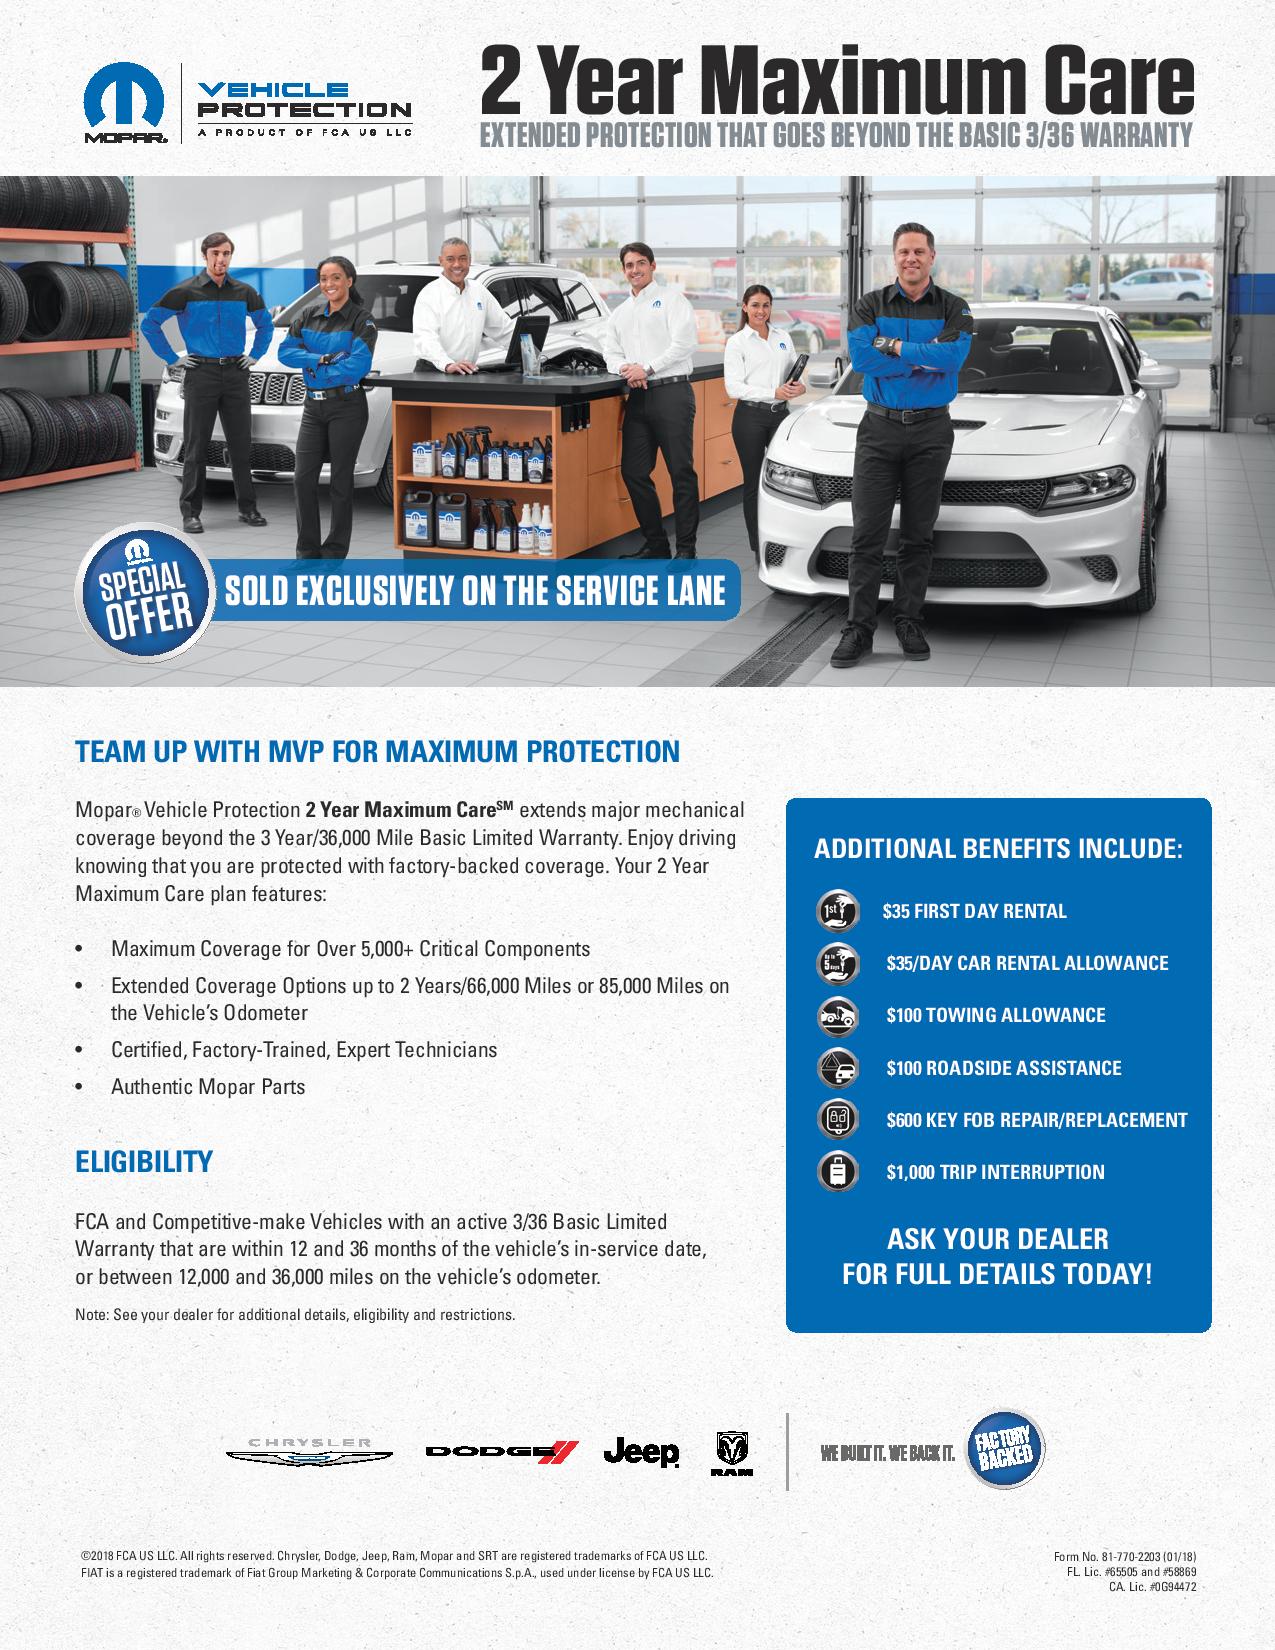 mopar-vehicle-protection-plan-what-is-a-financial-plan